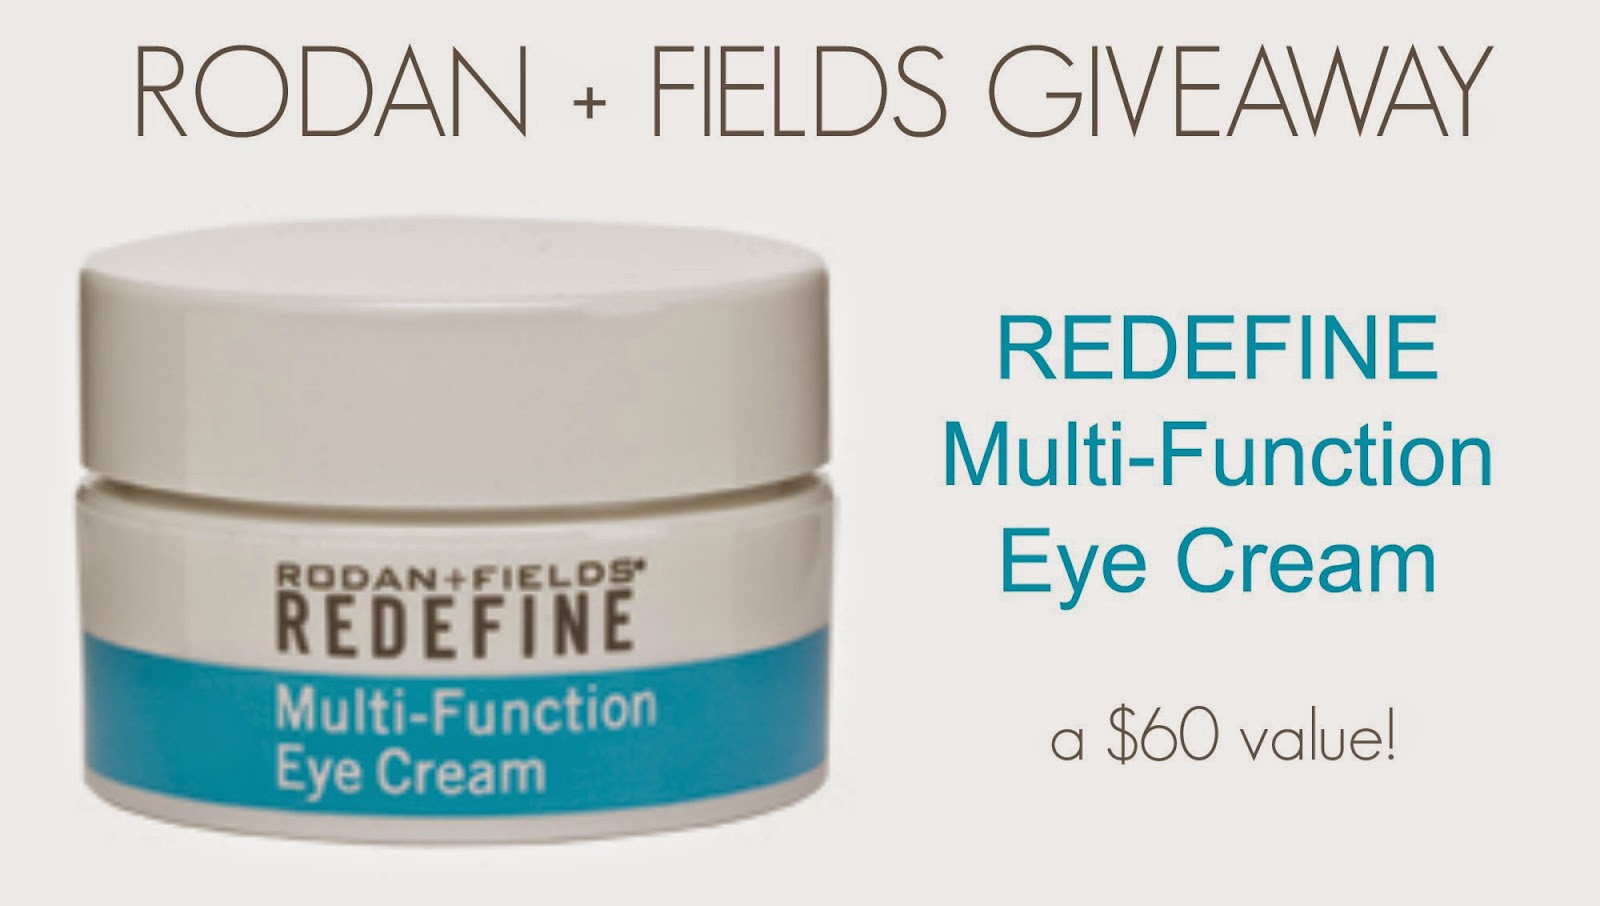 last day to enter R+F giveaway!!!